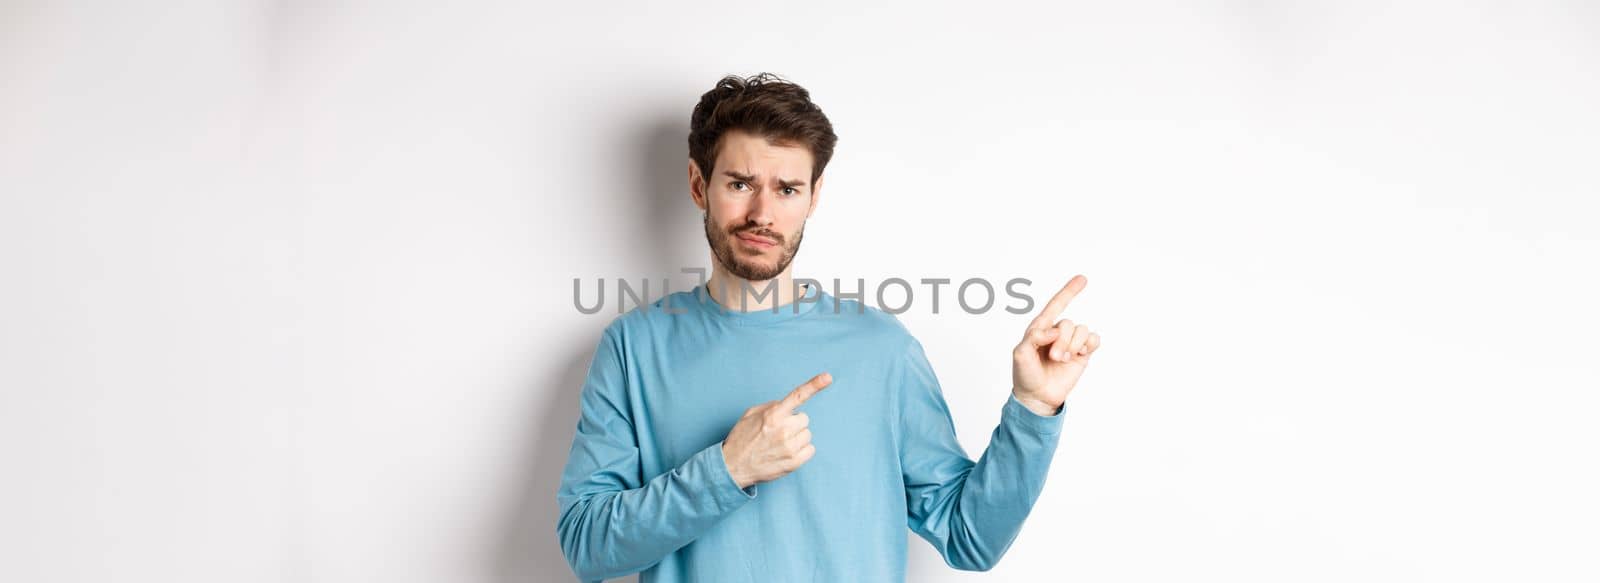 Skeptical young man with beard grimacing unsatisfied, frowning and pointing at upper left corner logo doubtful, standing upset over white background.